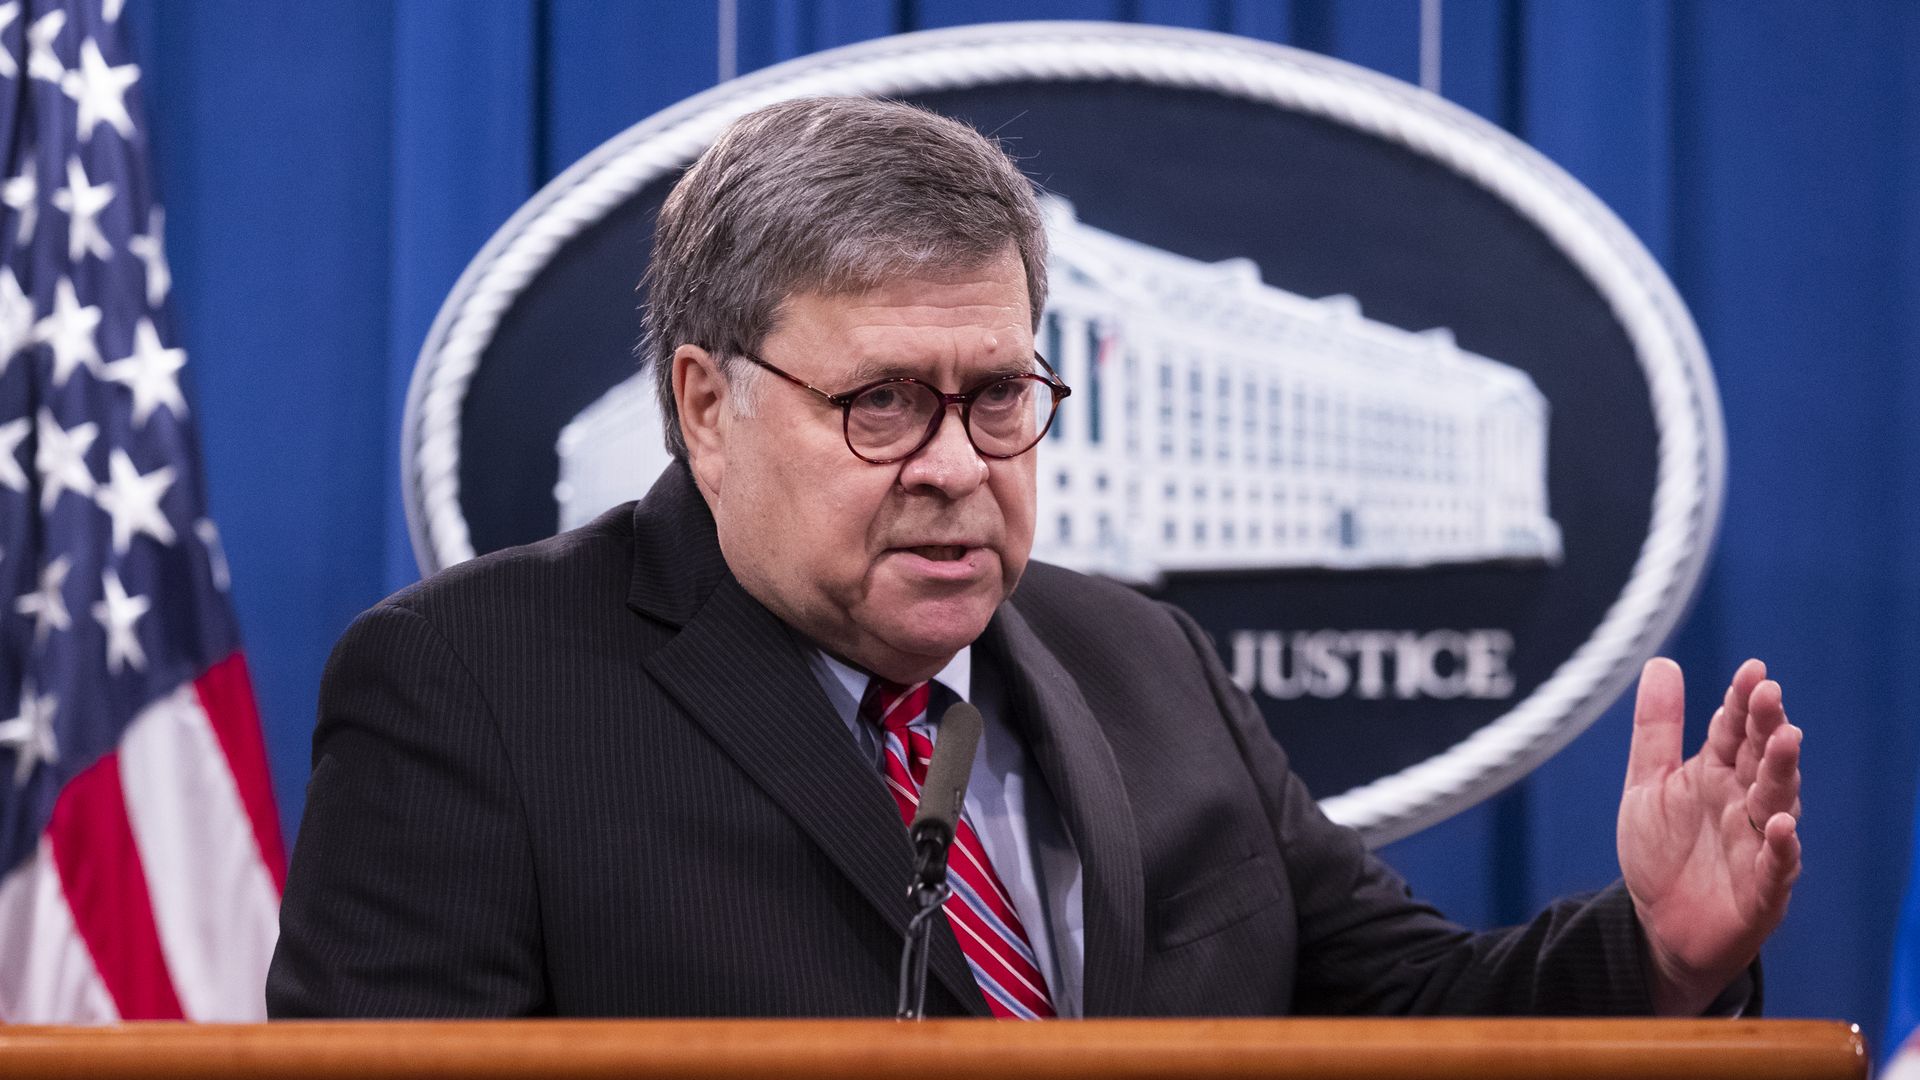 Picture of Bill Barr speaking behind a DOJ podium